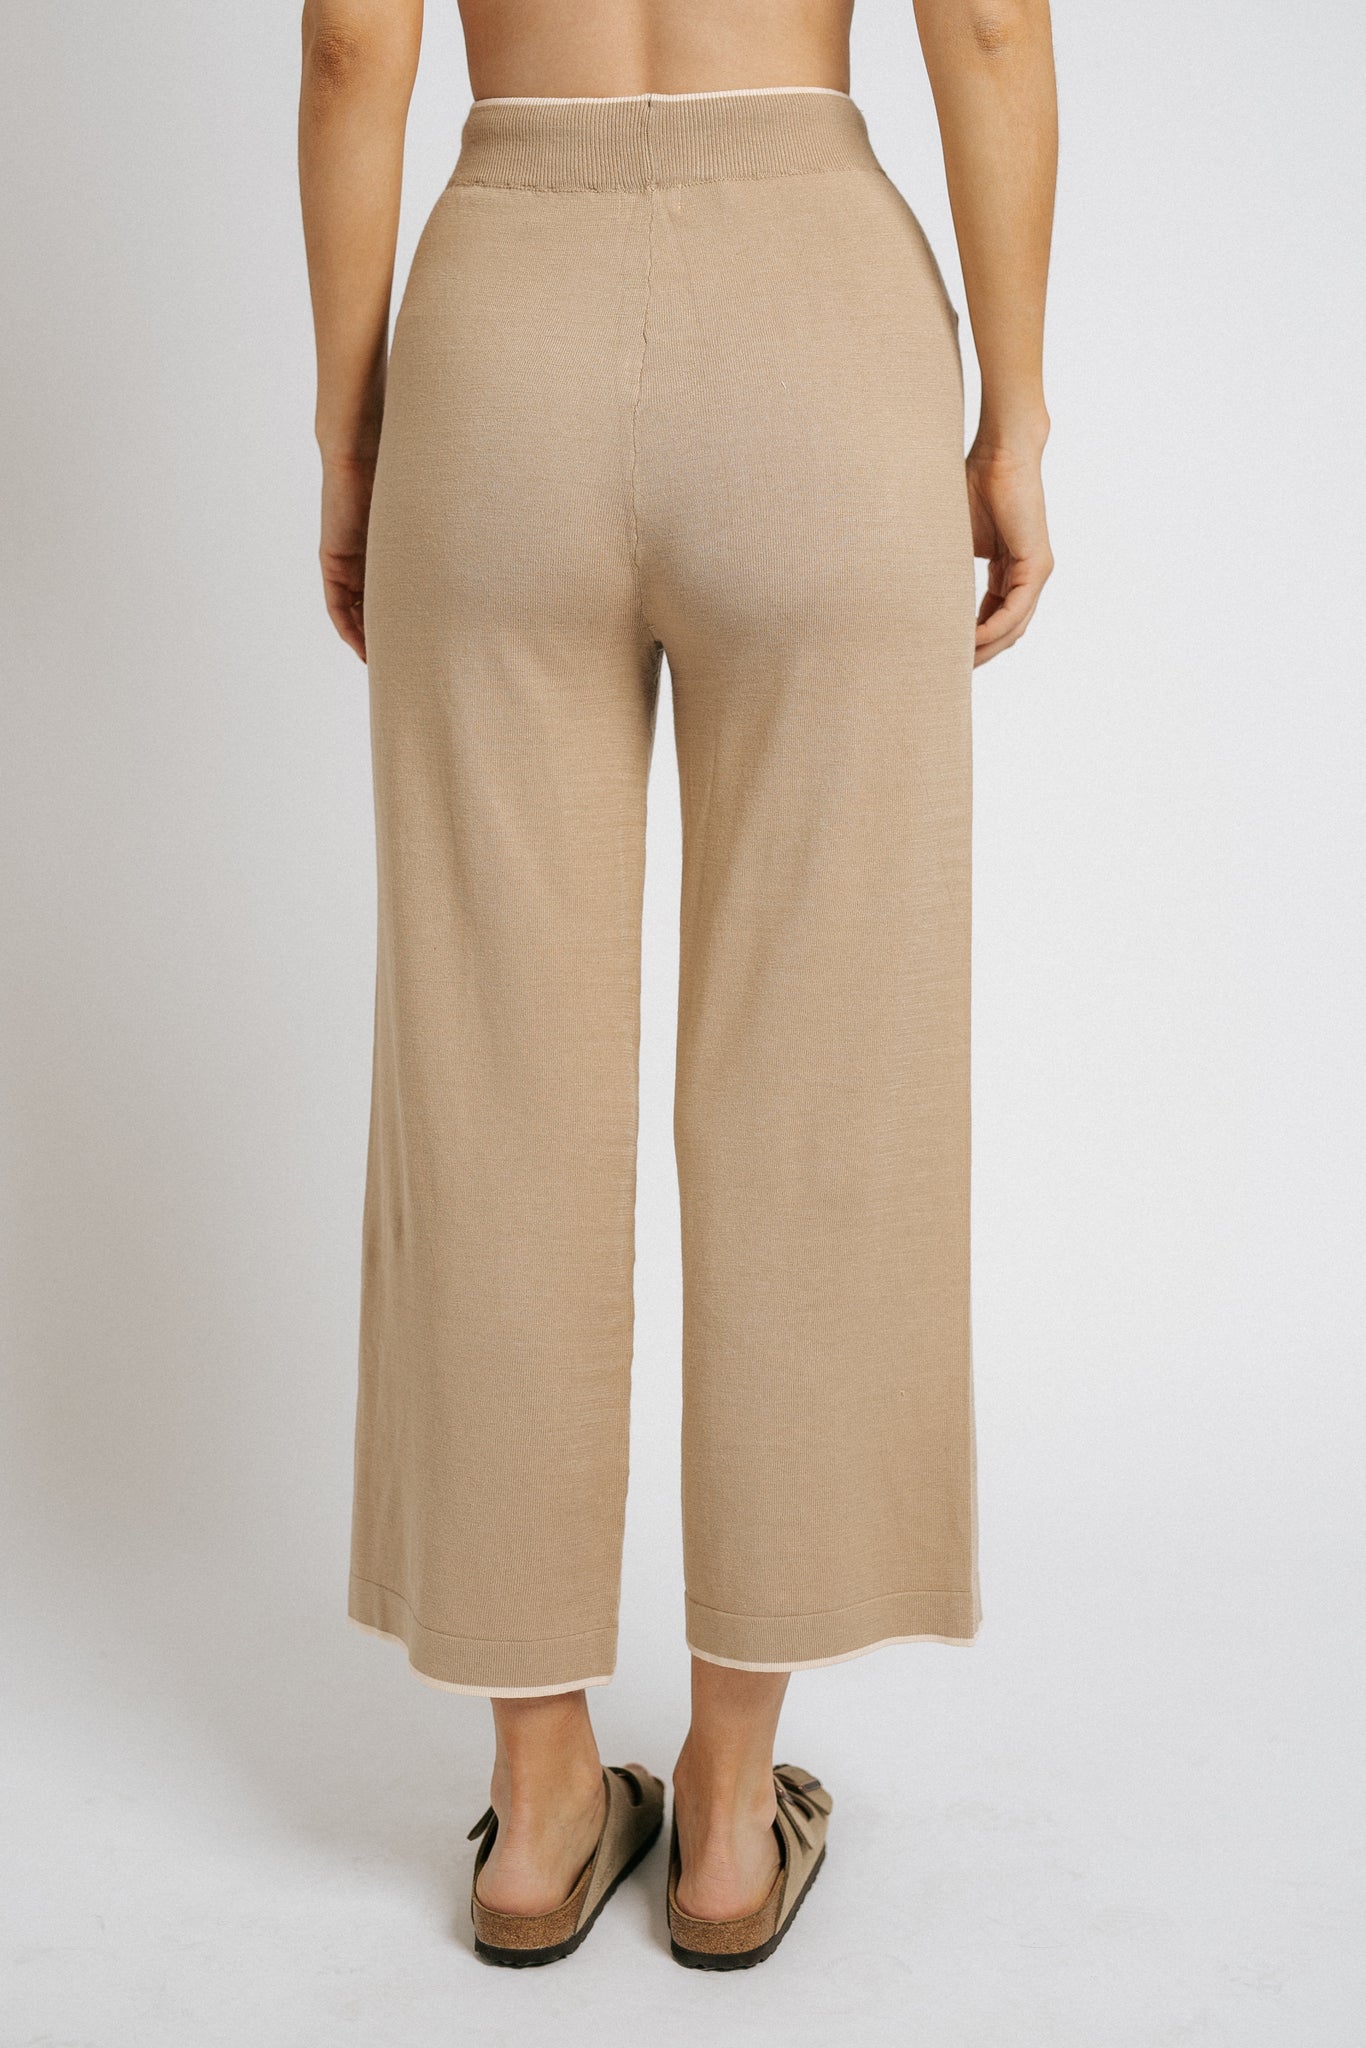 The Chateau Taupe Bottoms